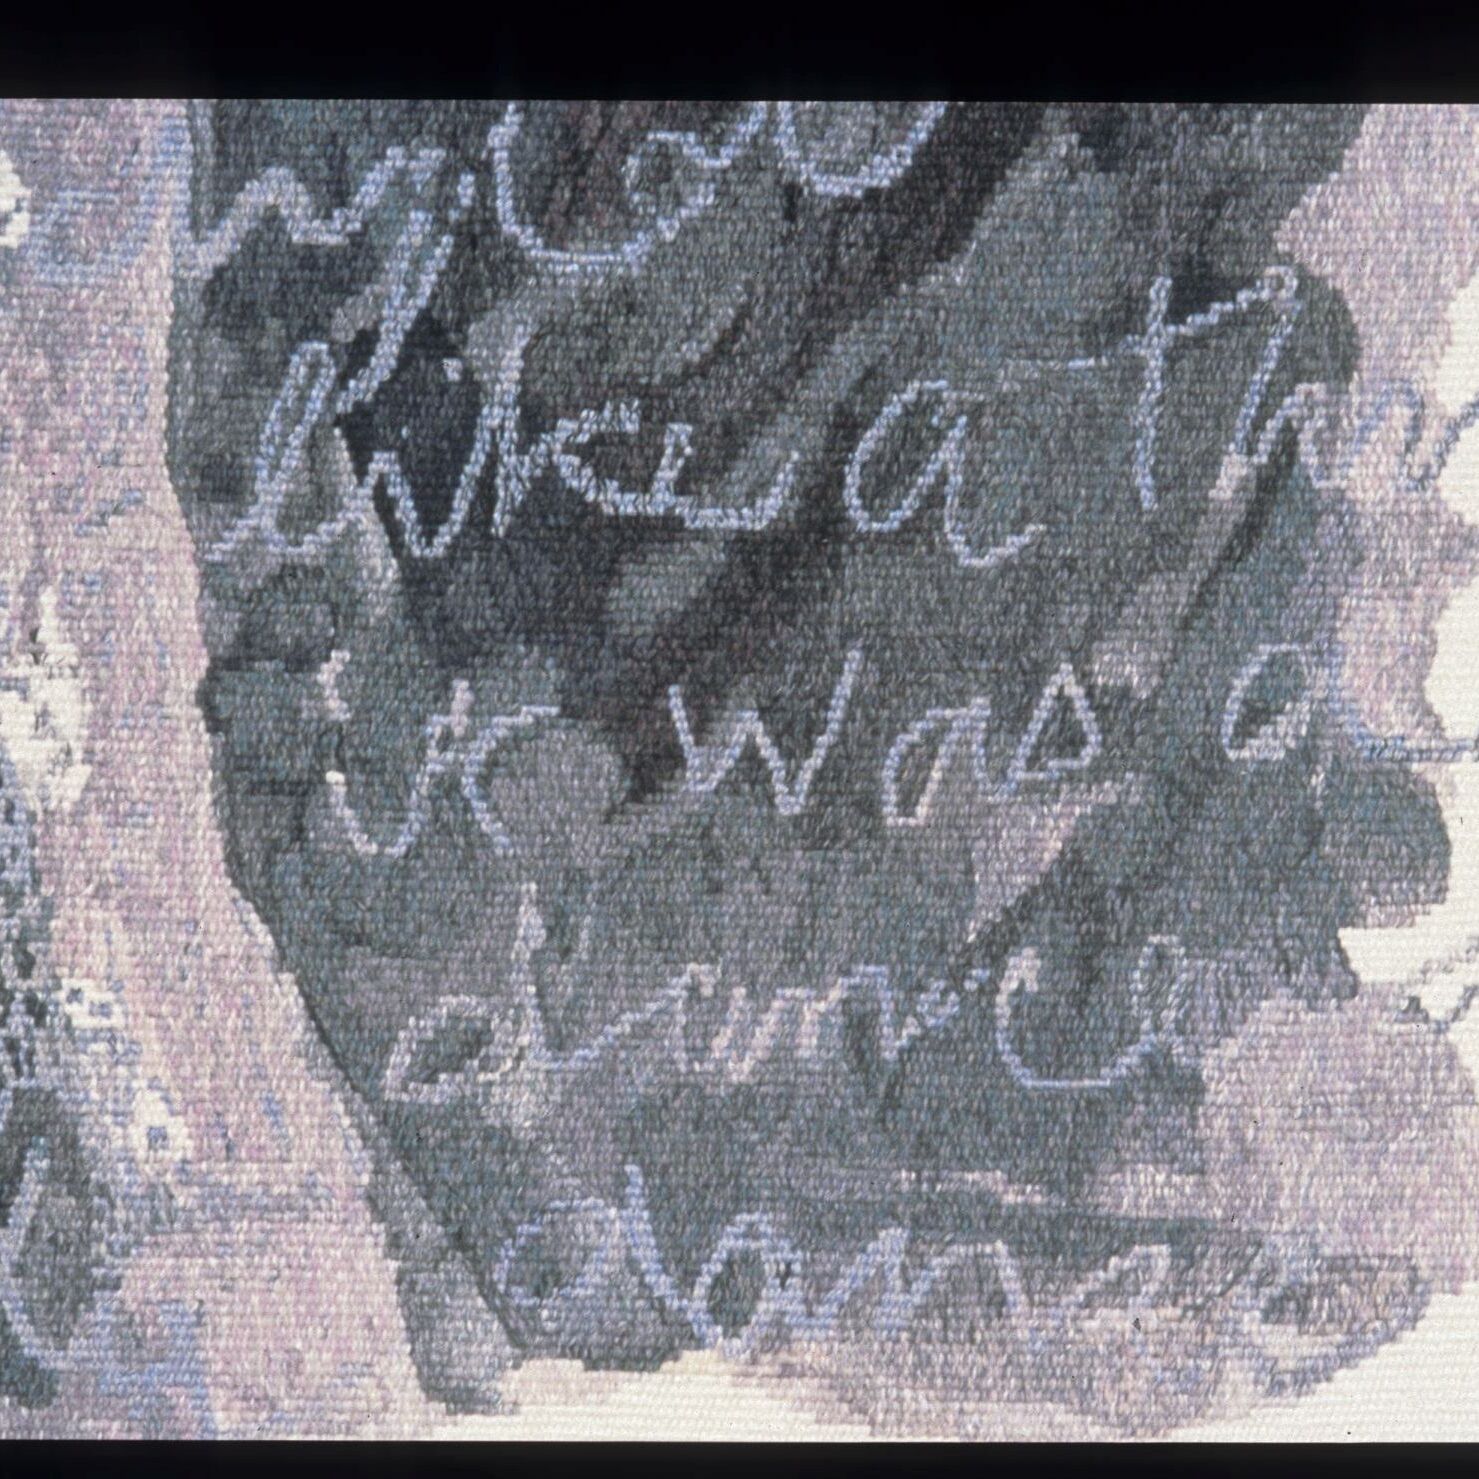 Daughter detail of text